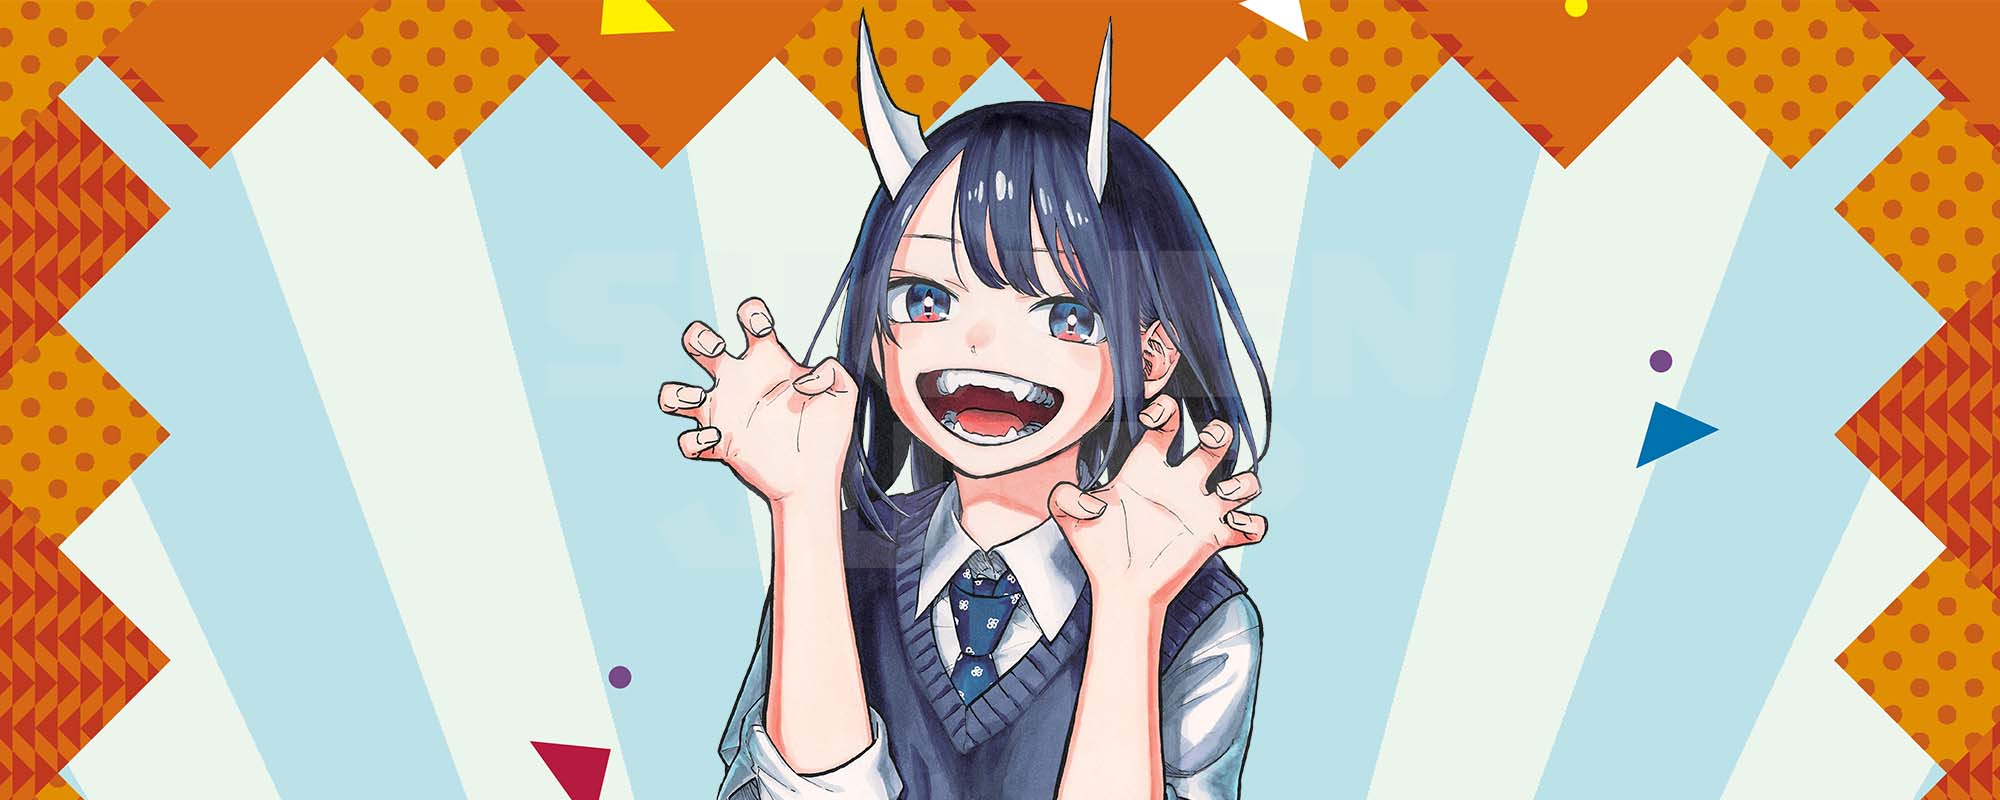 A banner image for the Viz Manga release of the RuriDragon manga written and illustrated by Masaoki Shindo and published by Shueisha. The image features the main character, a half-human / half-dragon teenaged girl named Ruri, playfully making a growling motion with her hands and mouth. A pair of horns protrude from her forehead.